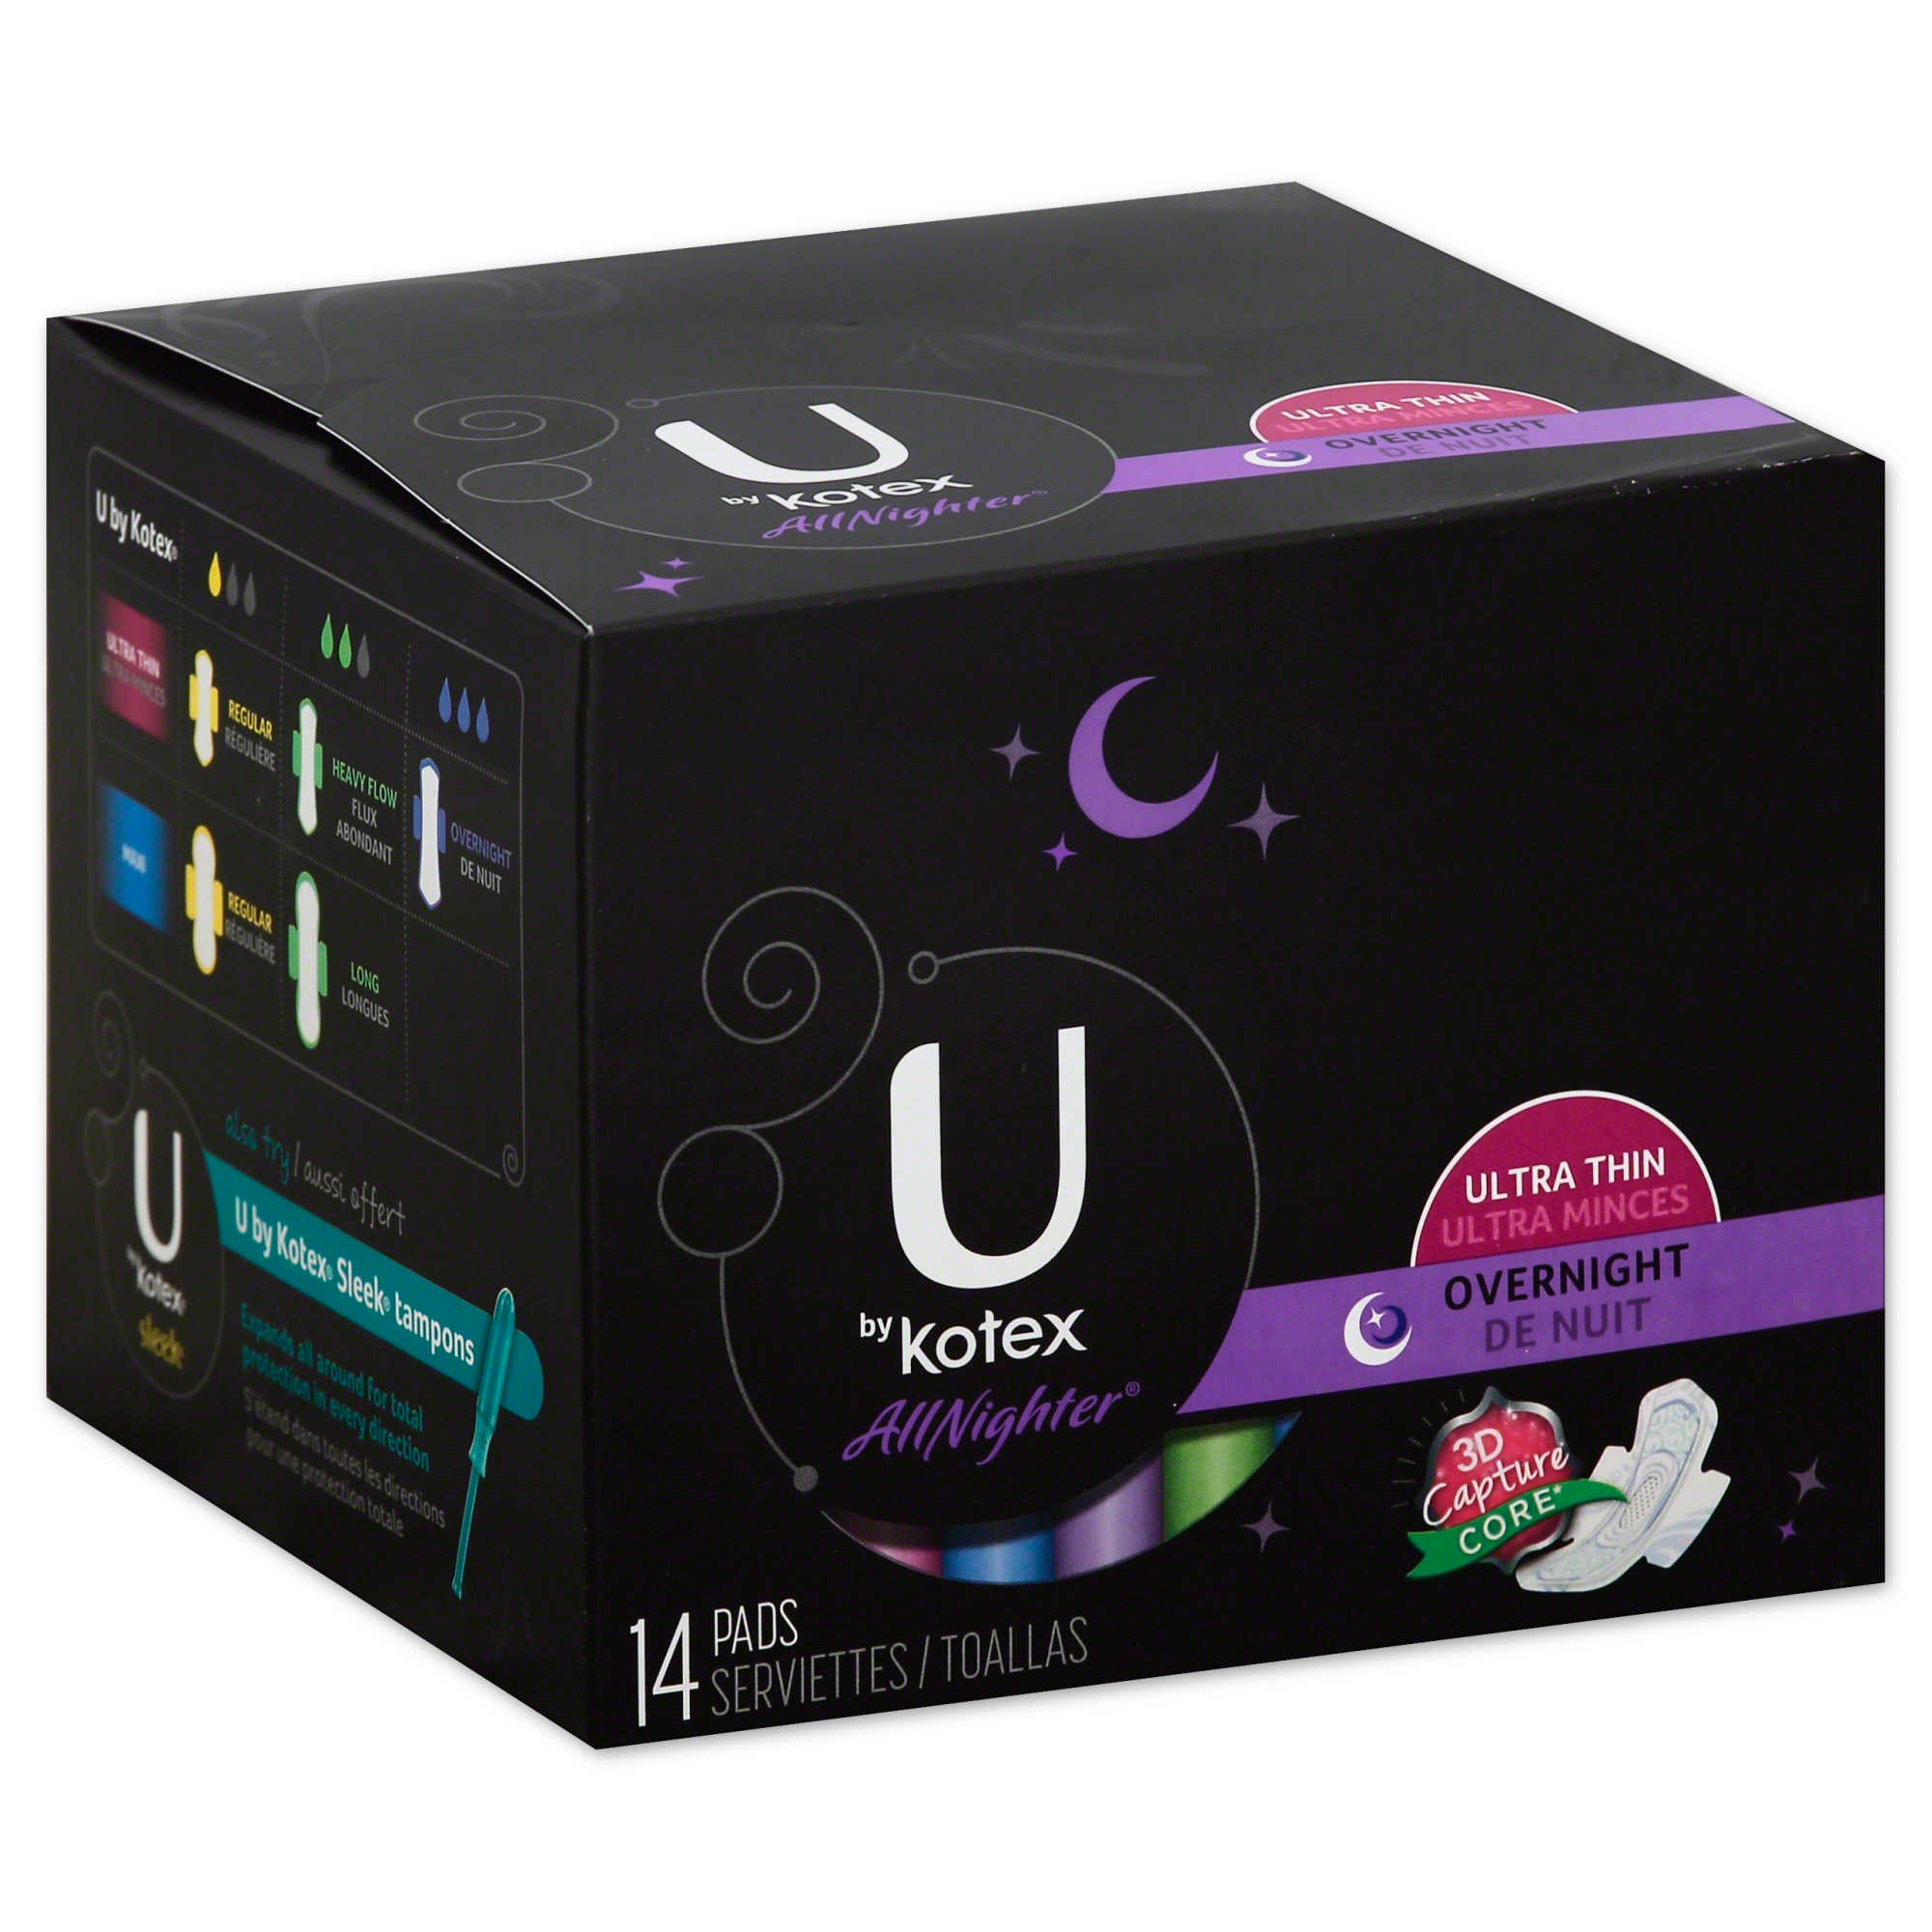 U by Kotex Security Pads, Ultra Thin, Wings, Over Night